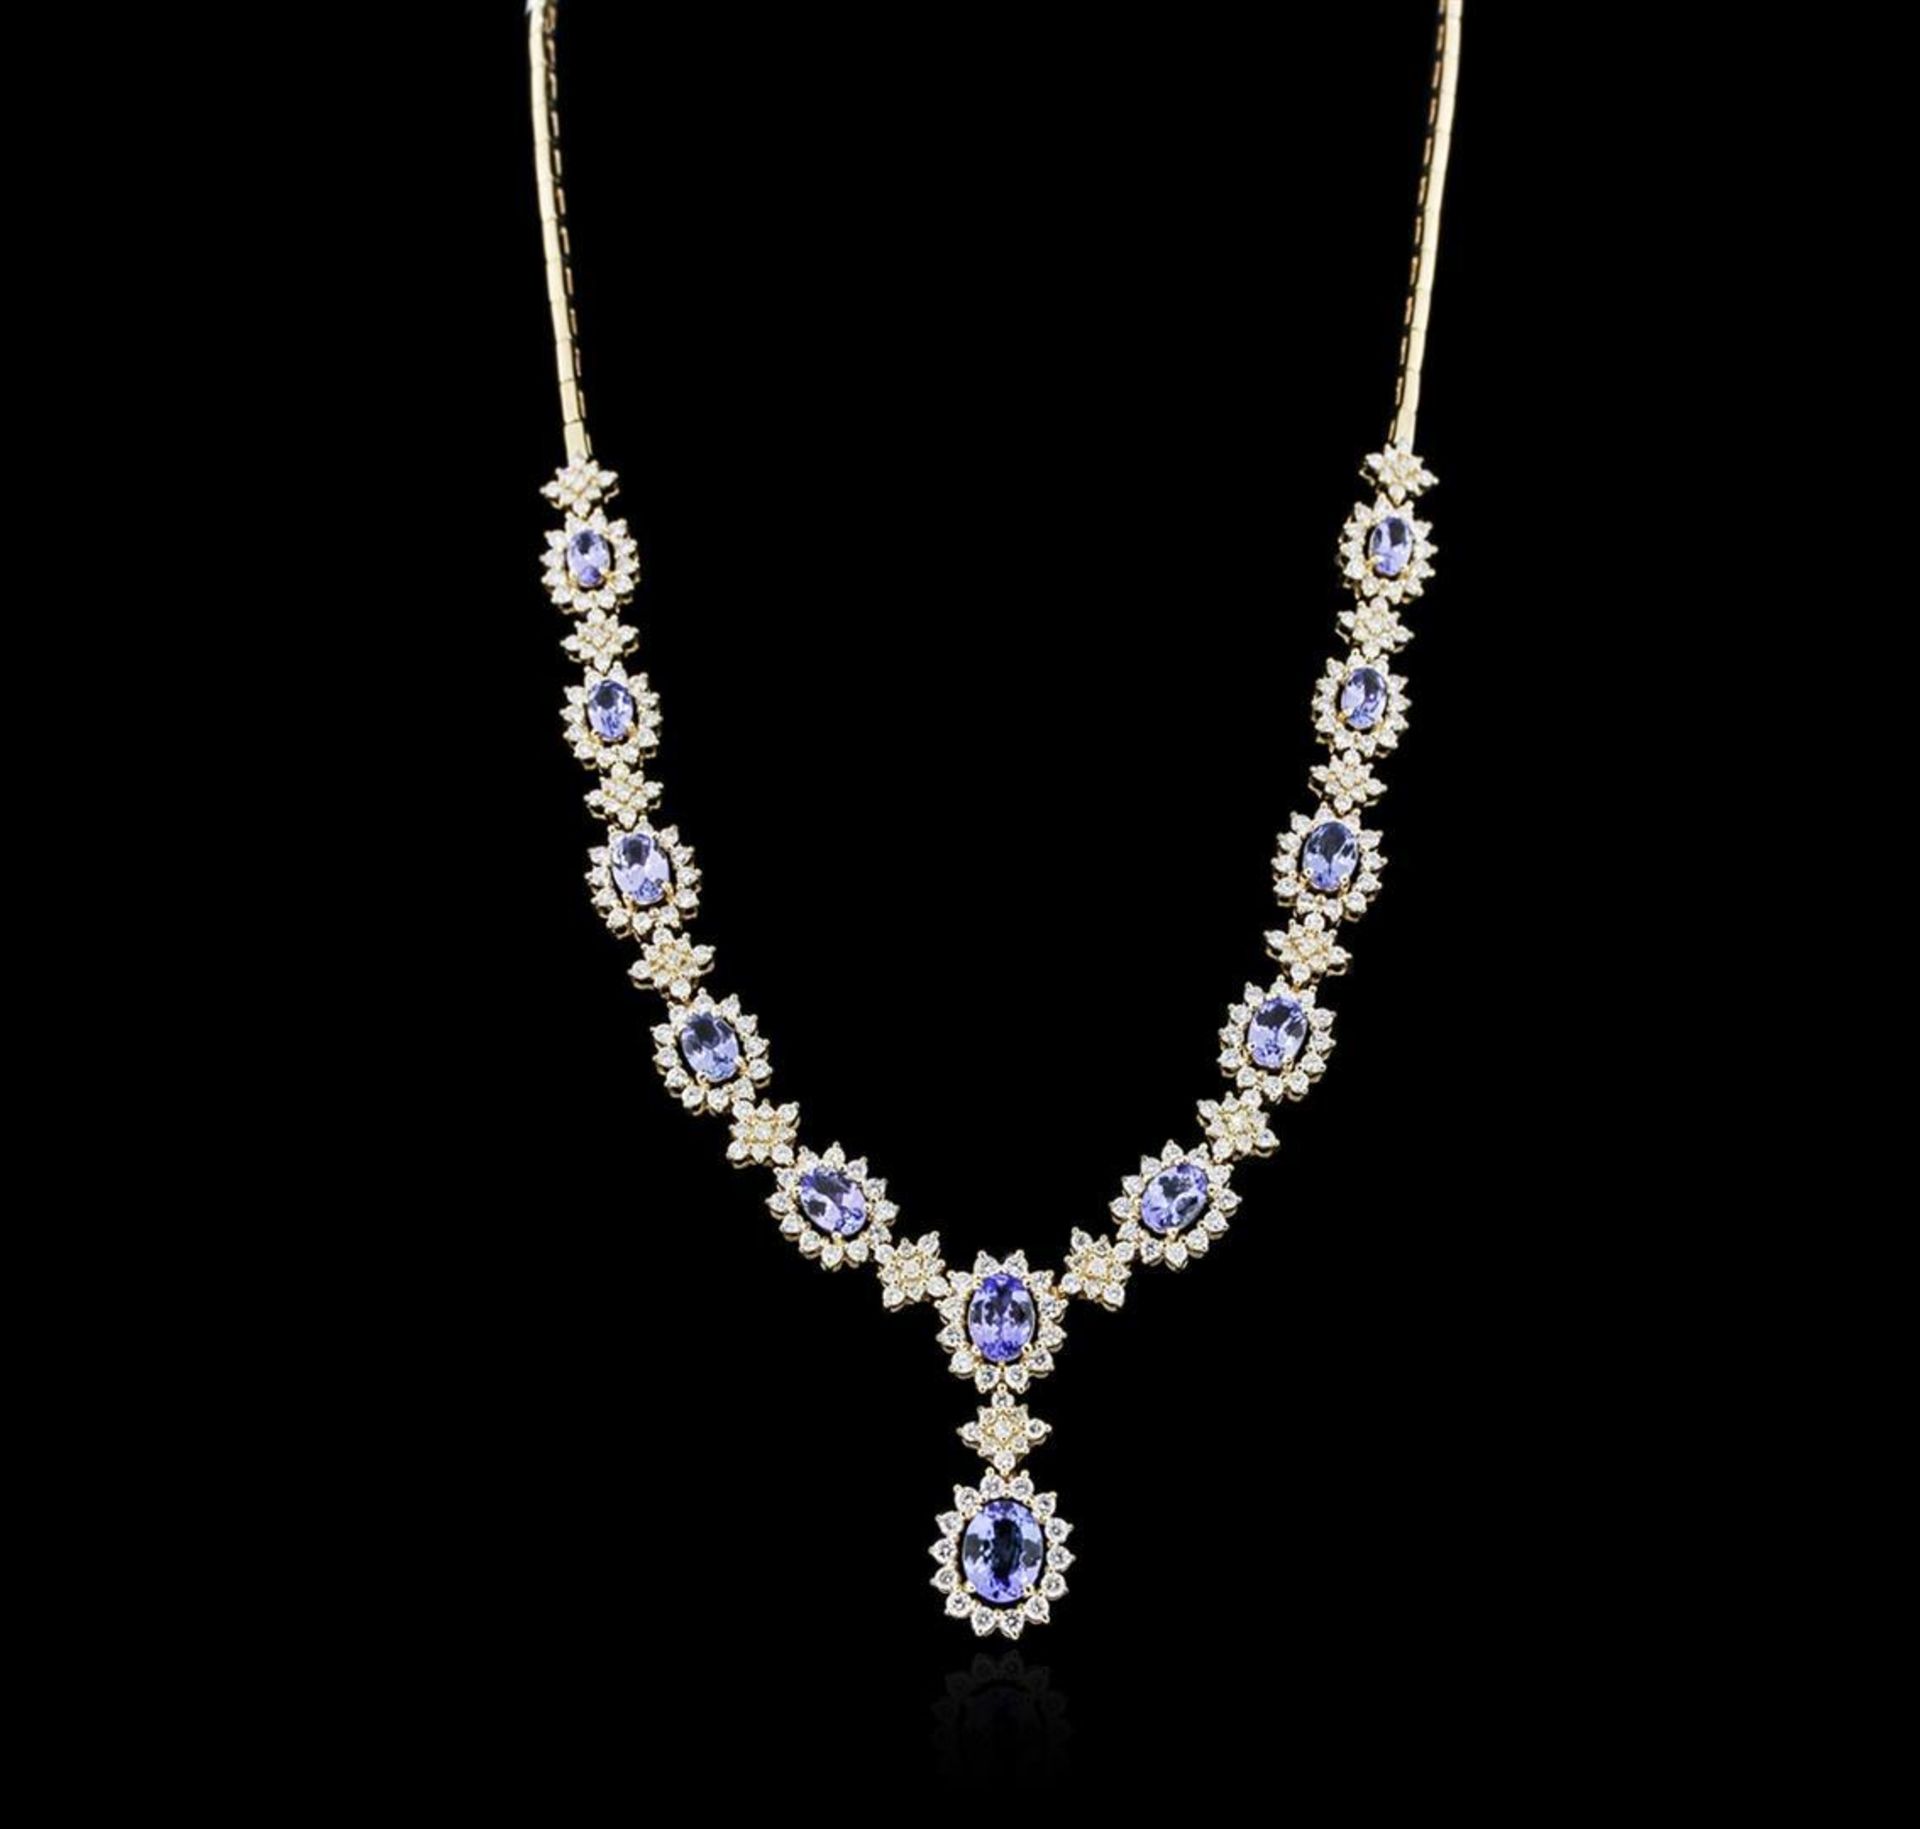 14KT Yellow Gold 10.54 ctw Tanzanite and Diamond Necklace - Image 2 of 3